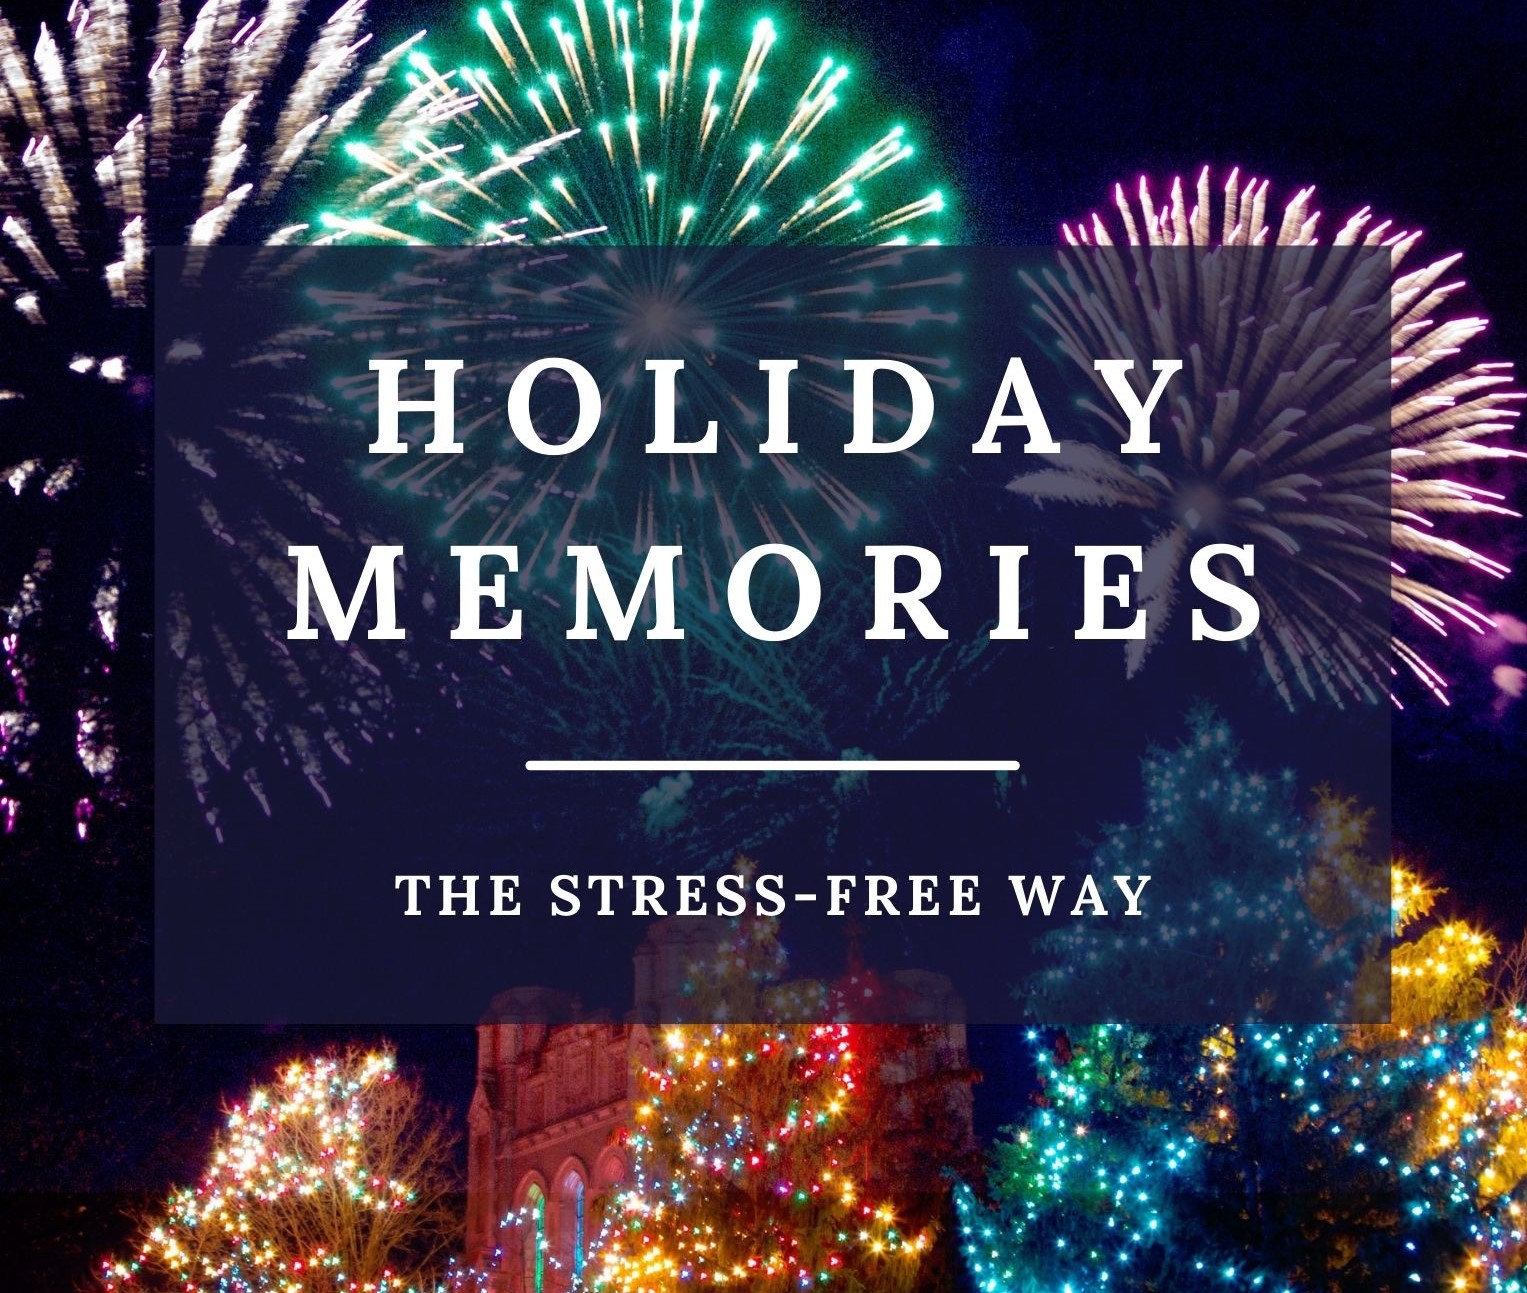 Get This Free Christmas Anxiety Relief Guide By Top Stress Coaching Expert